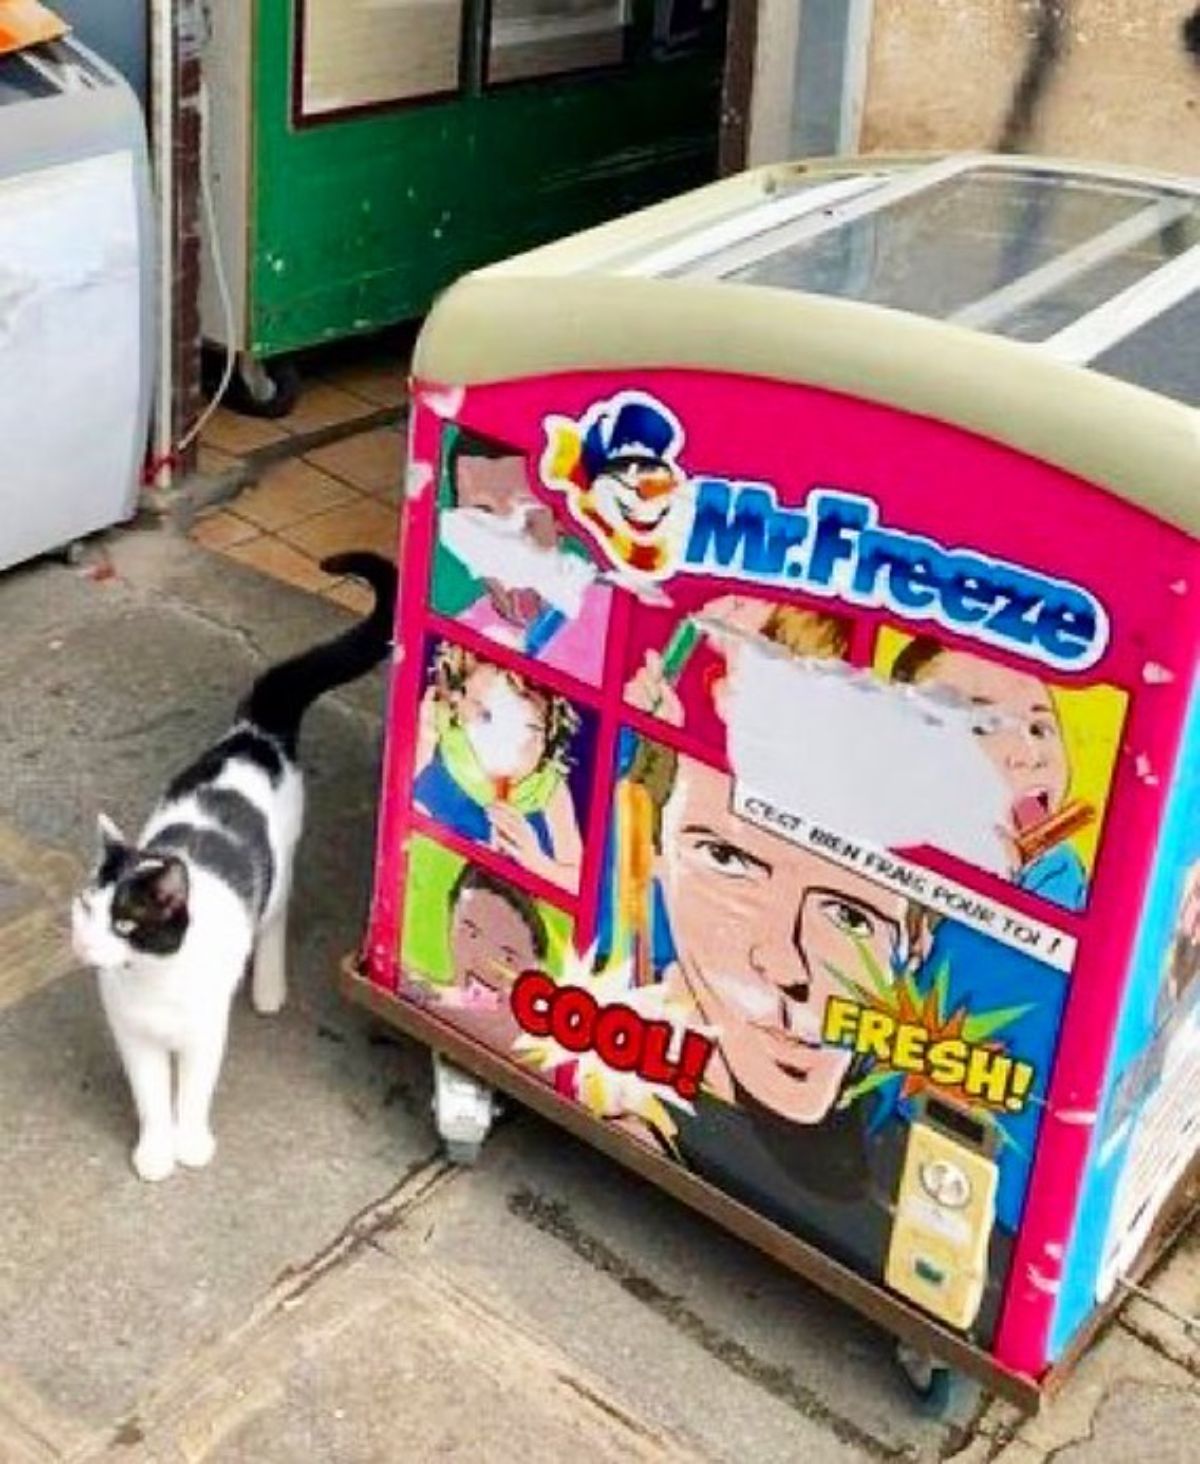 black and white cat standing next to an ice cream display